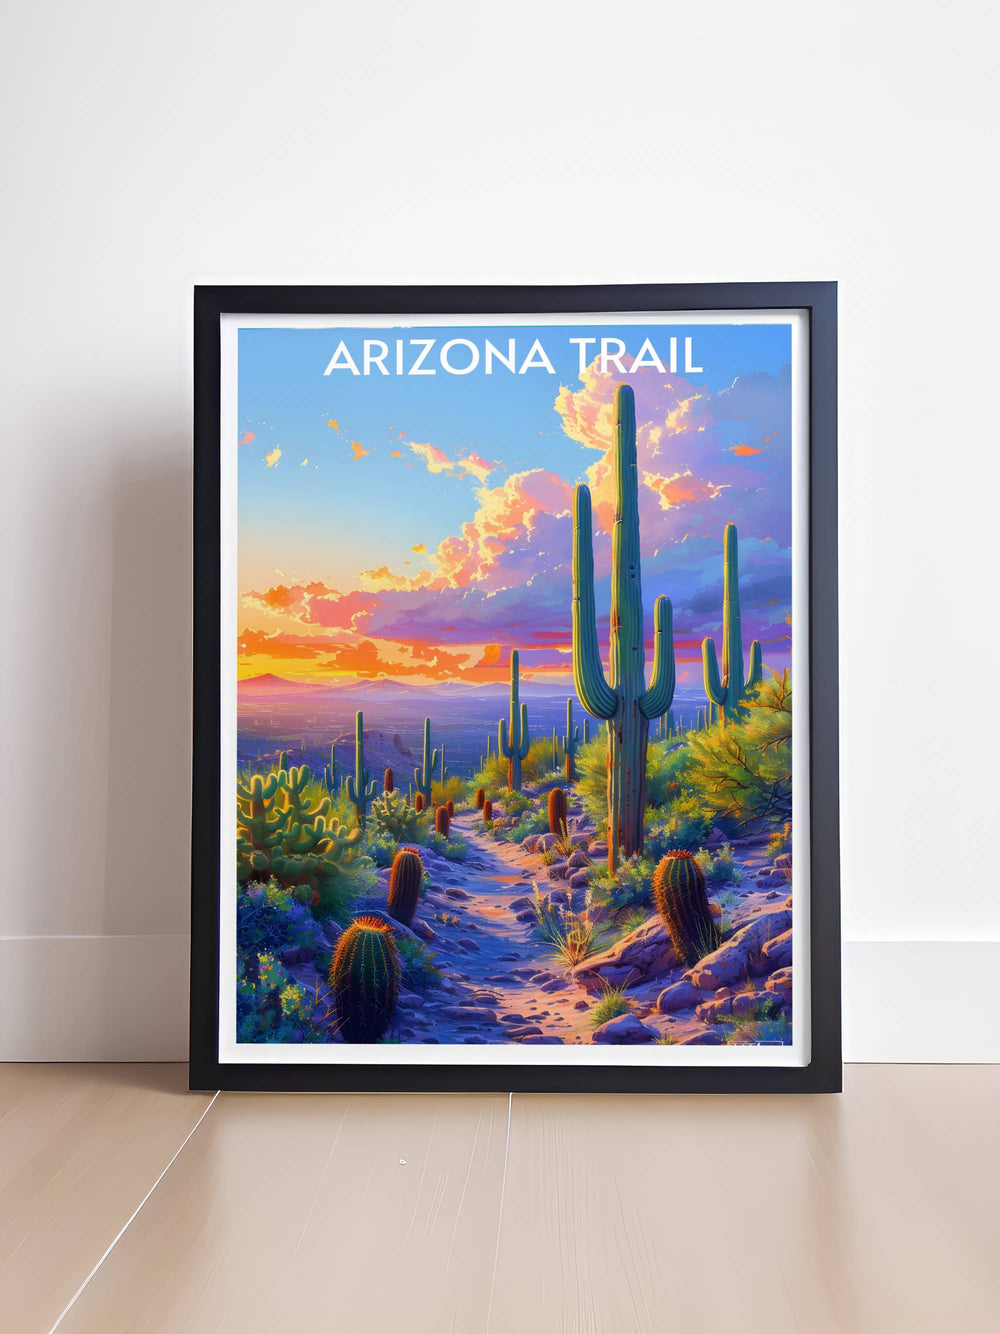 Beautiful retro travel poster showcasing the Appalachian Trail and Saguaro National Park ideal for adventure lovers and those who appreciate the great outdoors adding a touch of nostalgia and charm to any room.